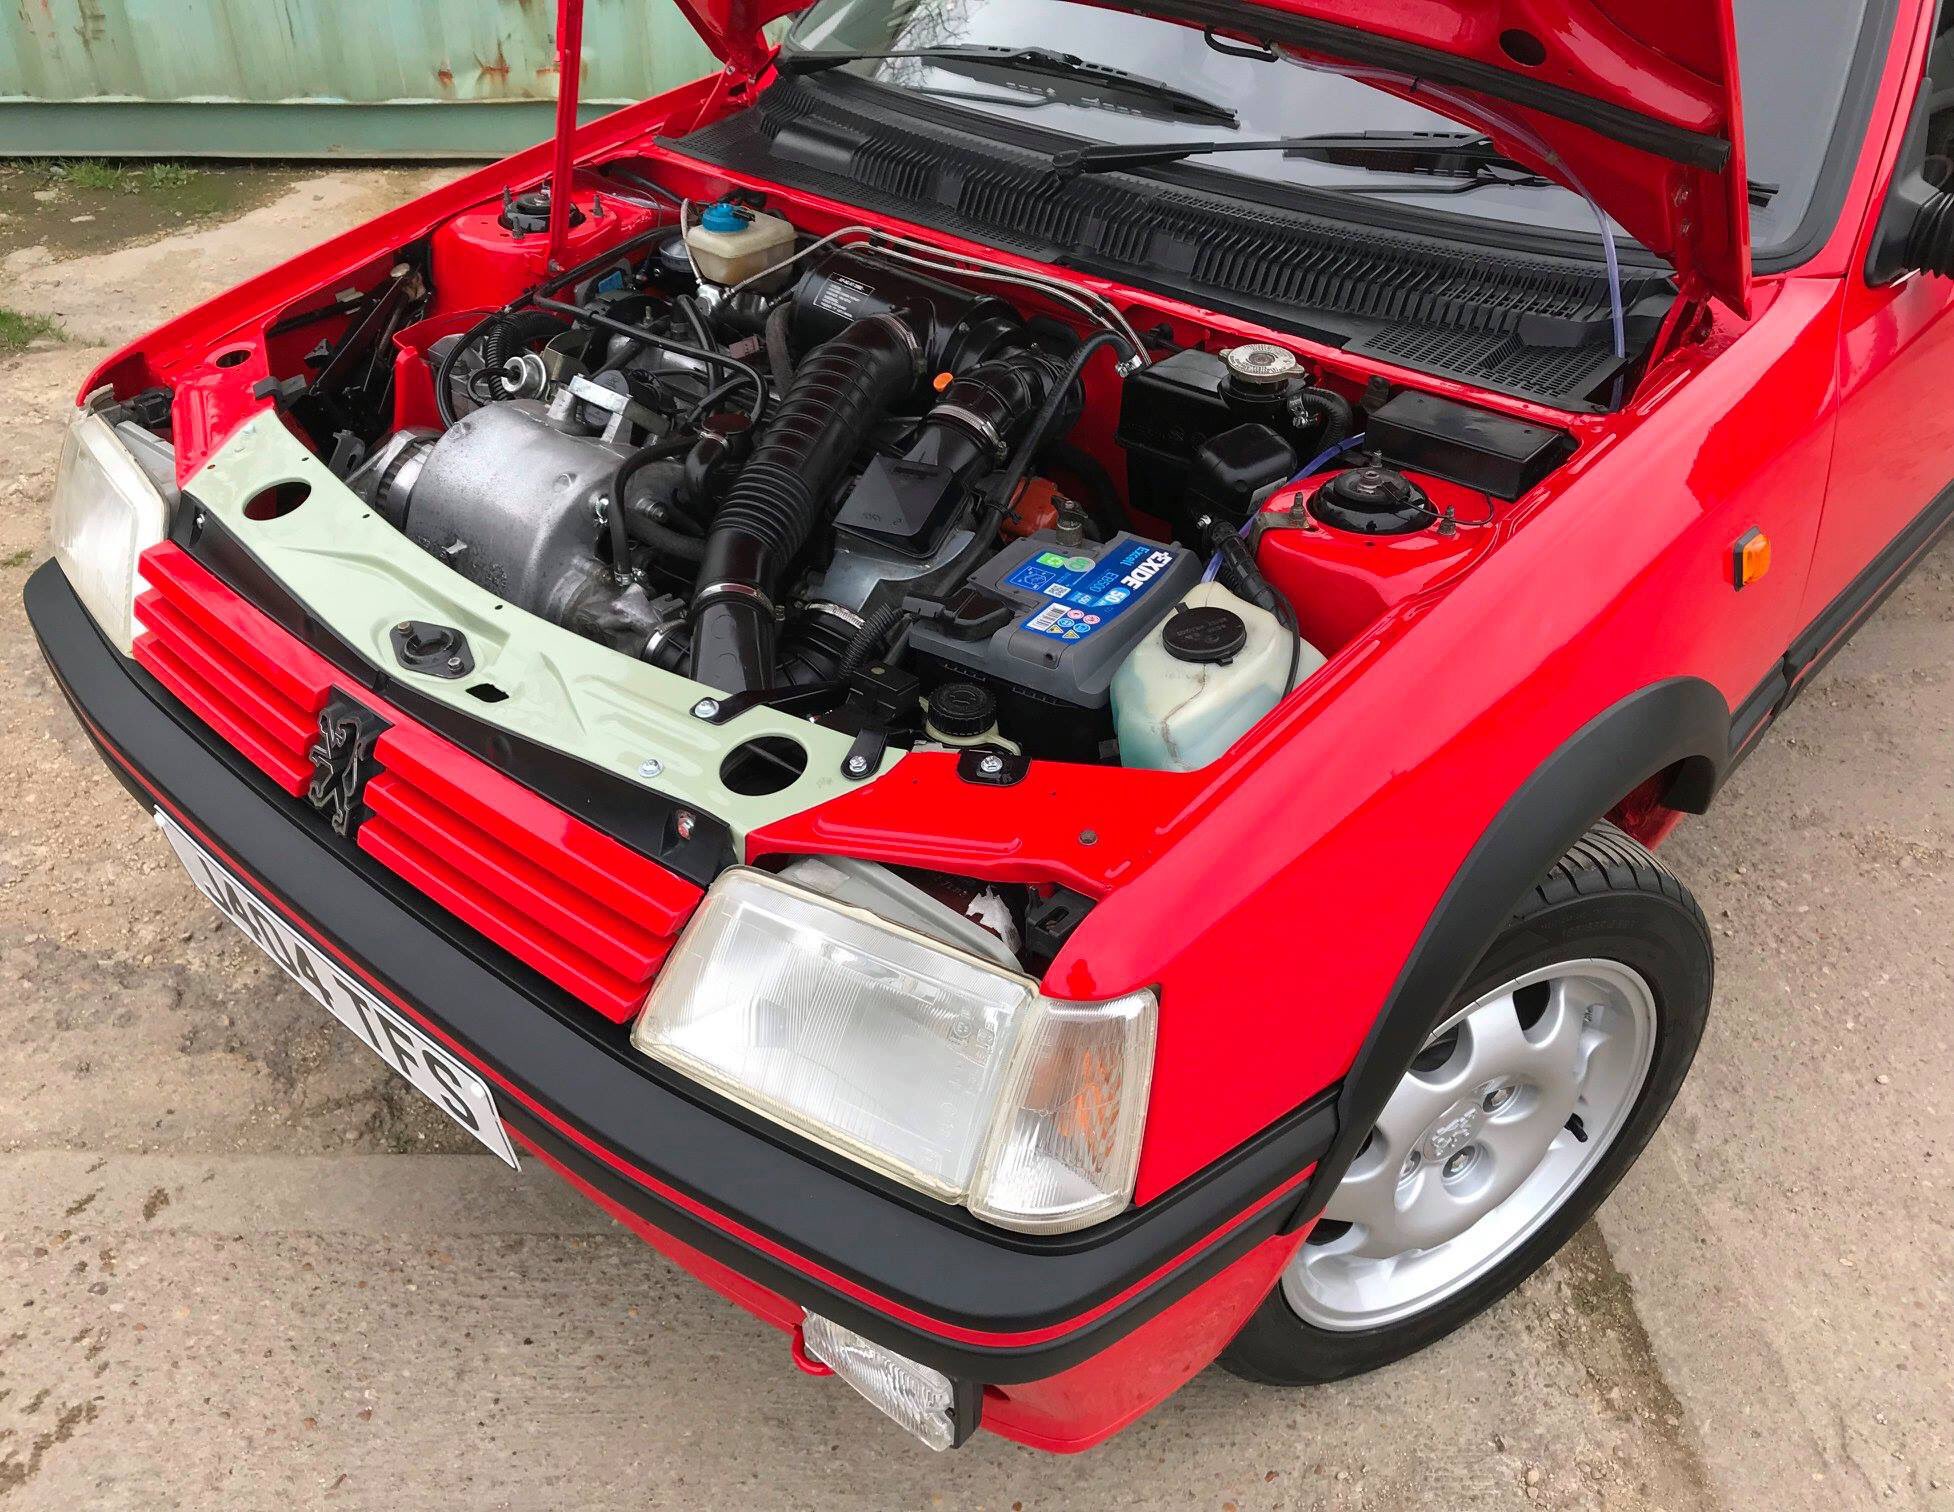 Motel Vulkanisch Eerlijk PUG1OFF on Twitter: "Mark's #Peugeot #205GTI was collected at the weekend  after a full exterior restoration along with general maintenance &amp;  servicing. https://t.co/Ae56xuUTT2 https://t.co/fLRXwTQBOw" / Twitter